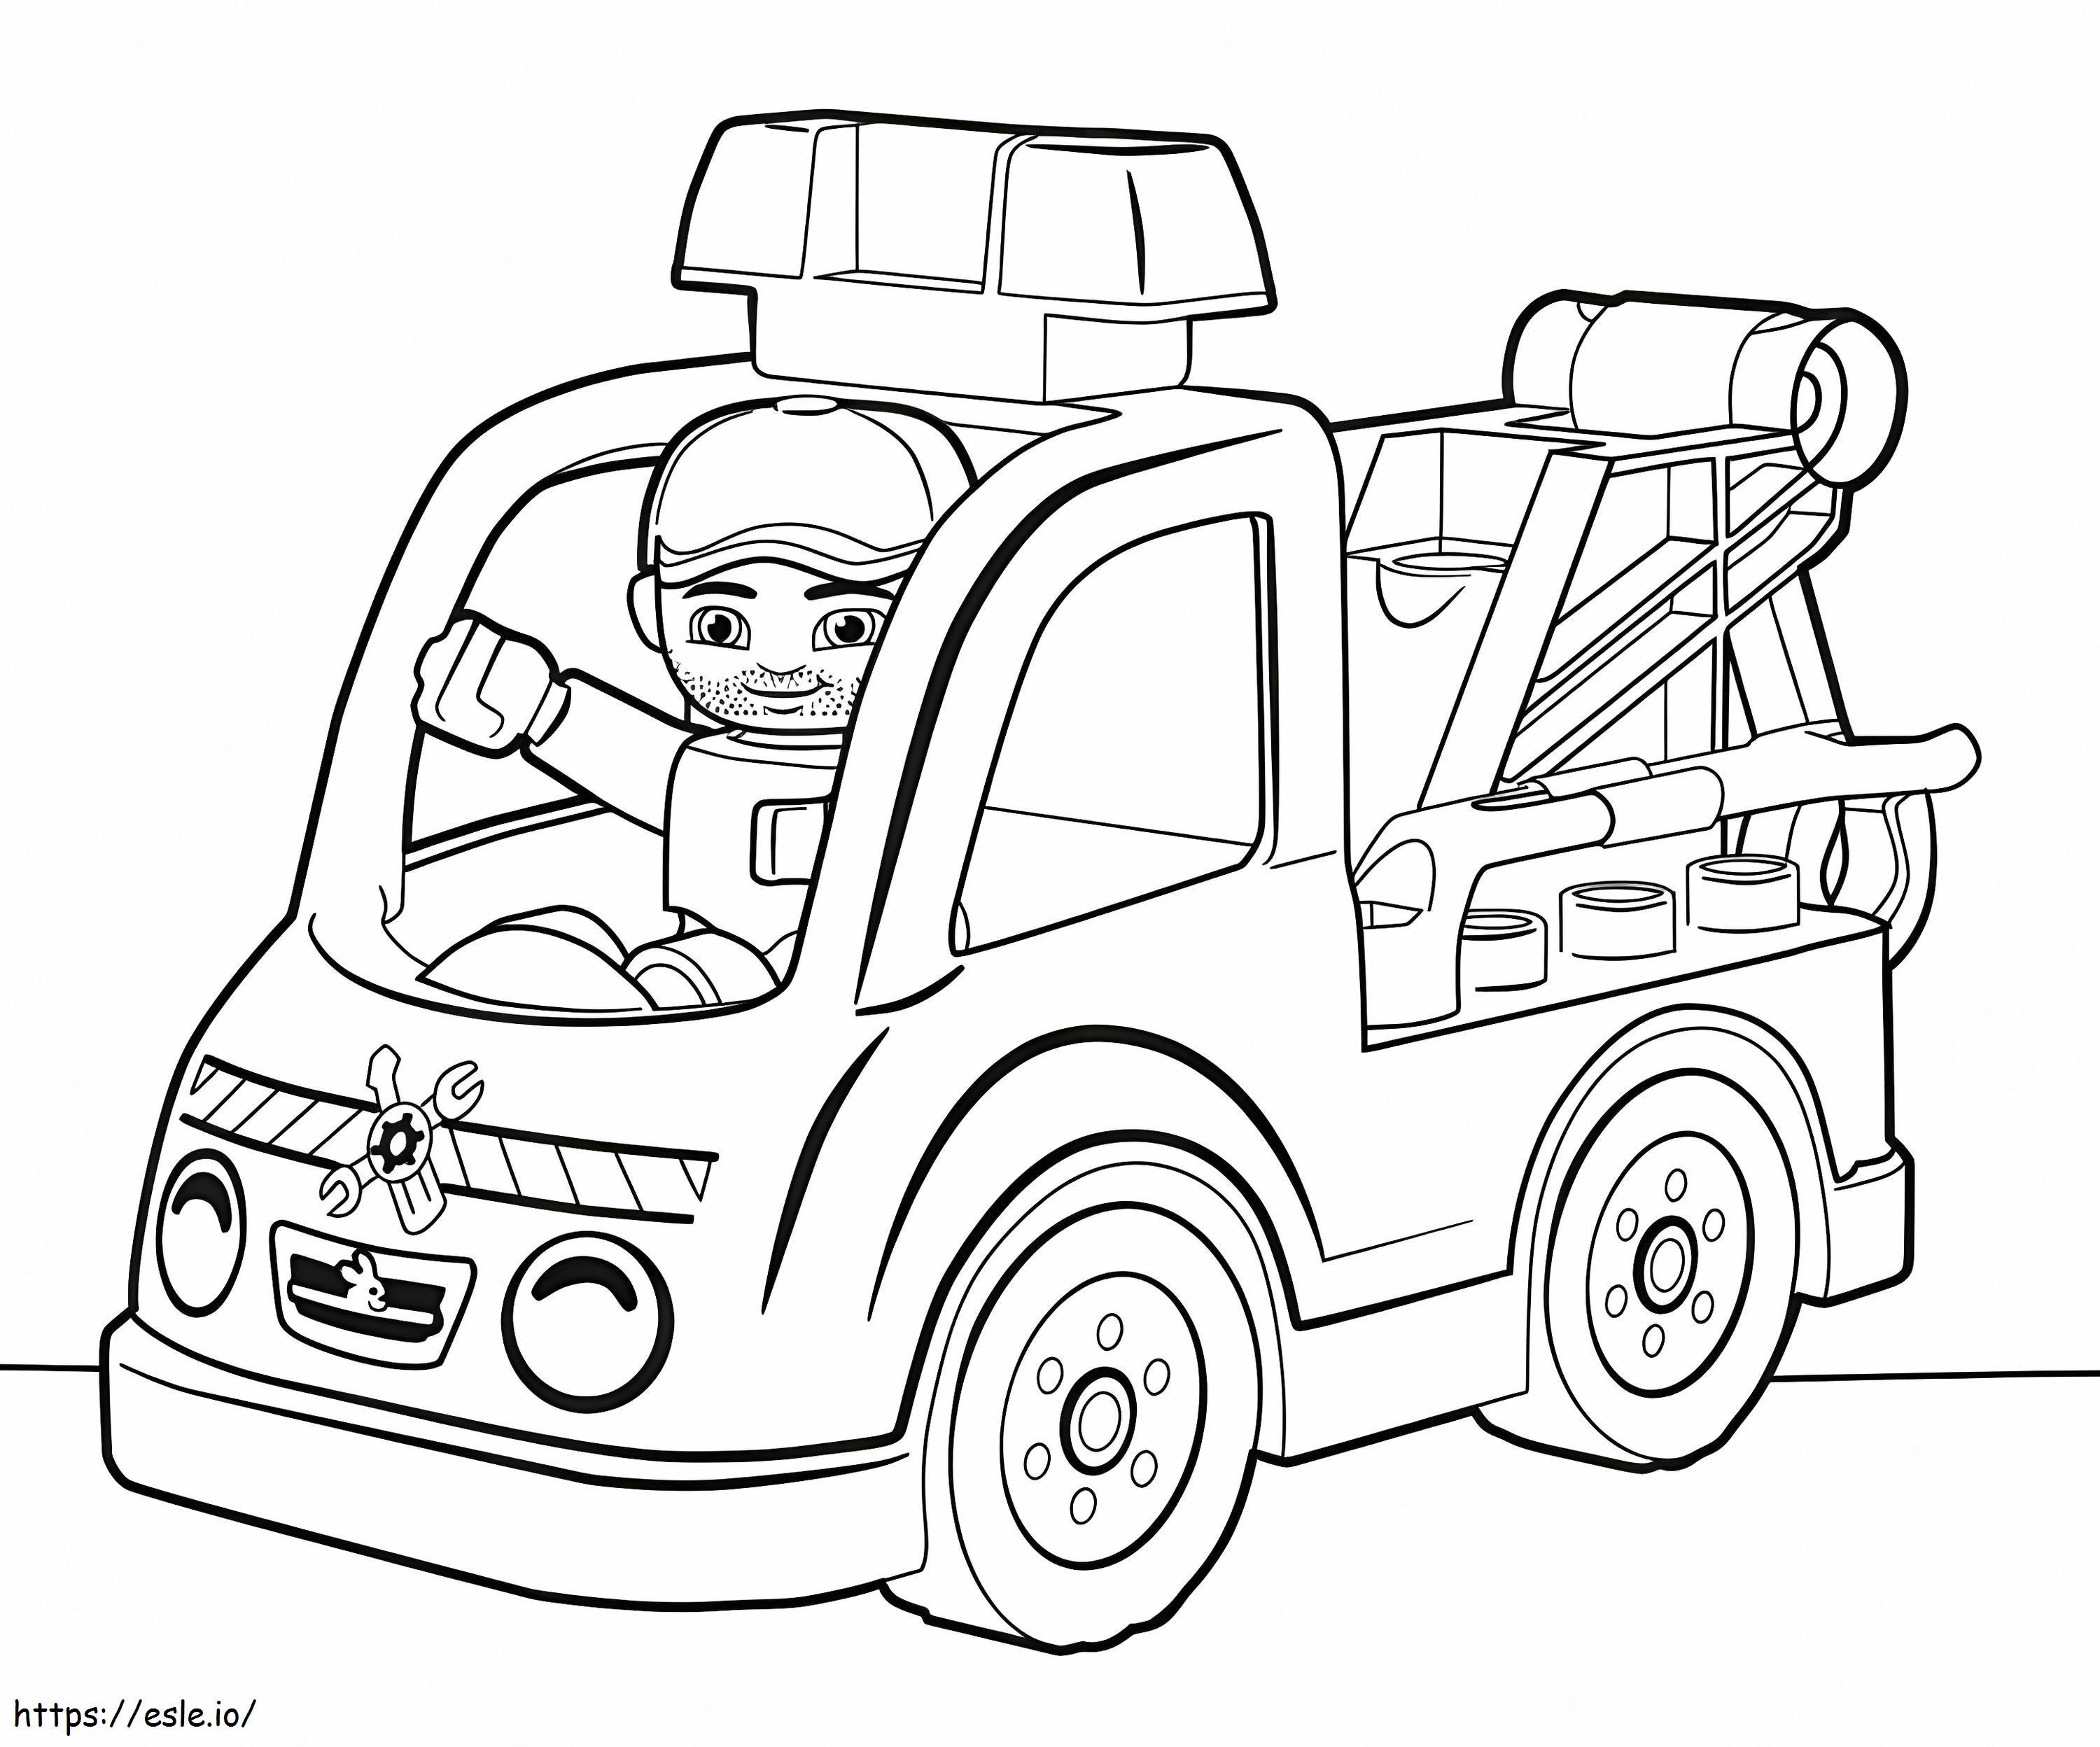 Tow Truck Lego Duplo coloring page